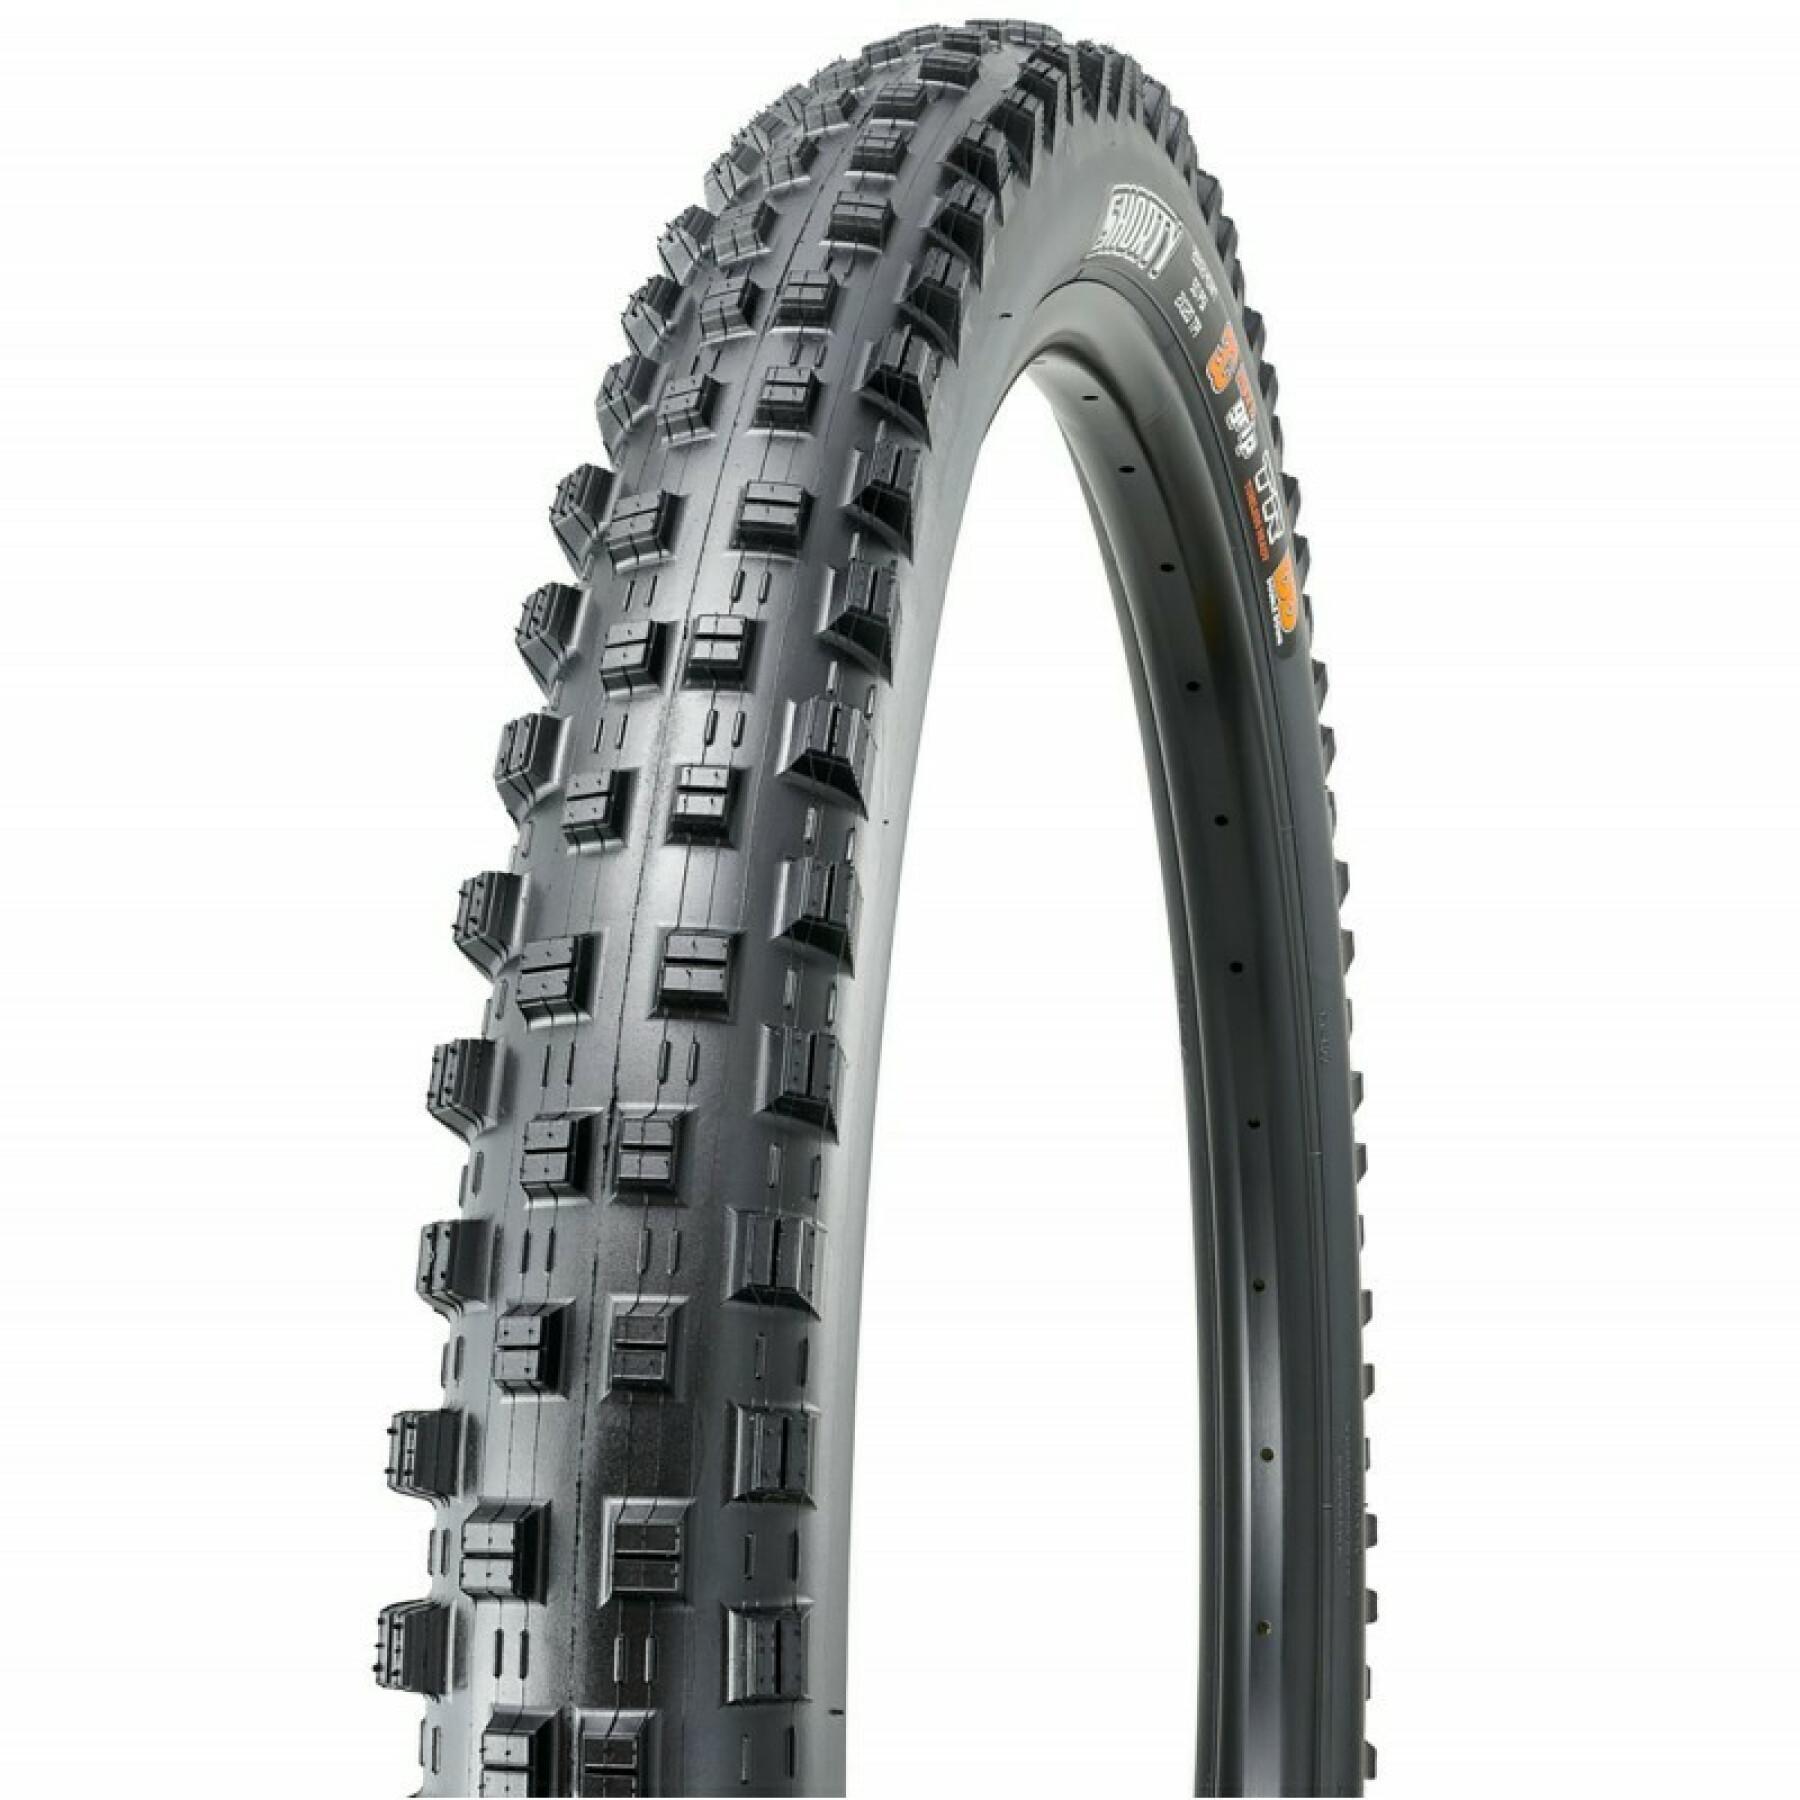 Zachte band Maxxis Shorty 27.5x2.40wt 3c Grip / Tubeless Ready / dh